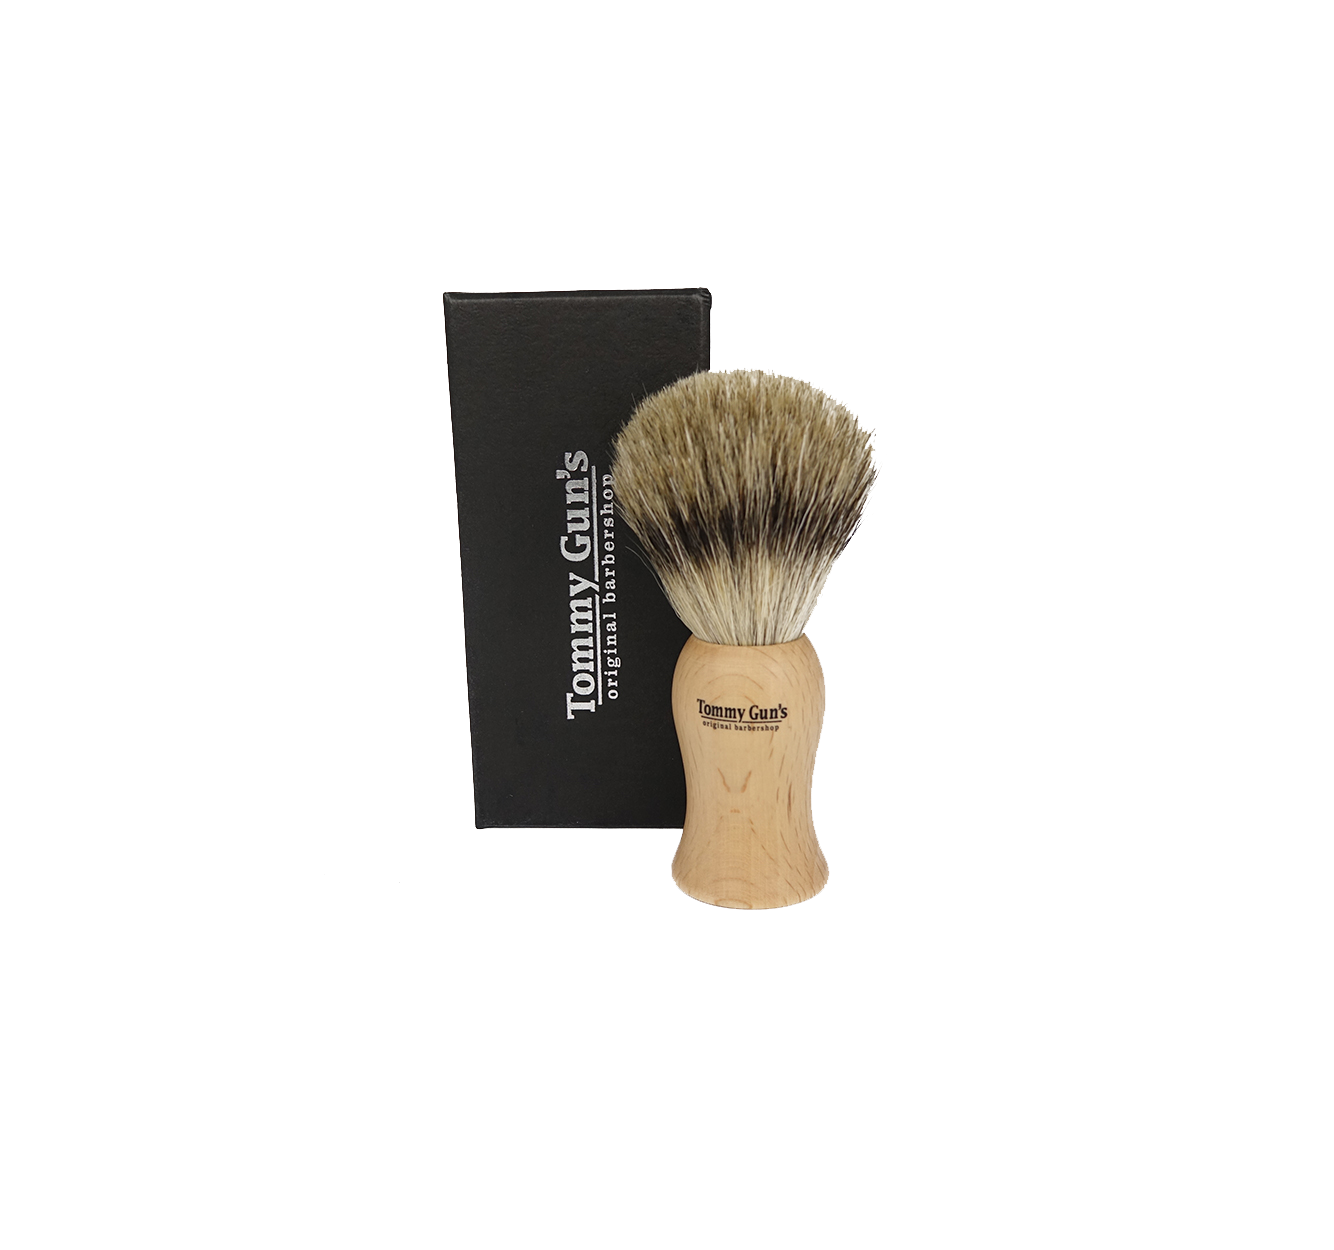 Tommy Gun's Shave Tommy Guns Shave Brush Beachwood Handle 20mm Pure Badger BE22-BE37